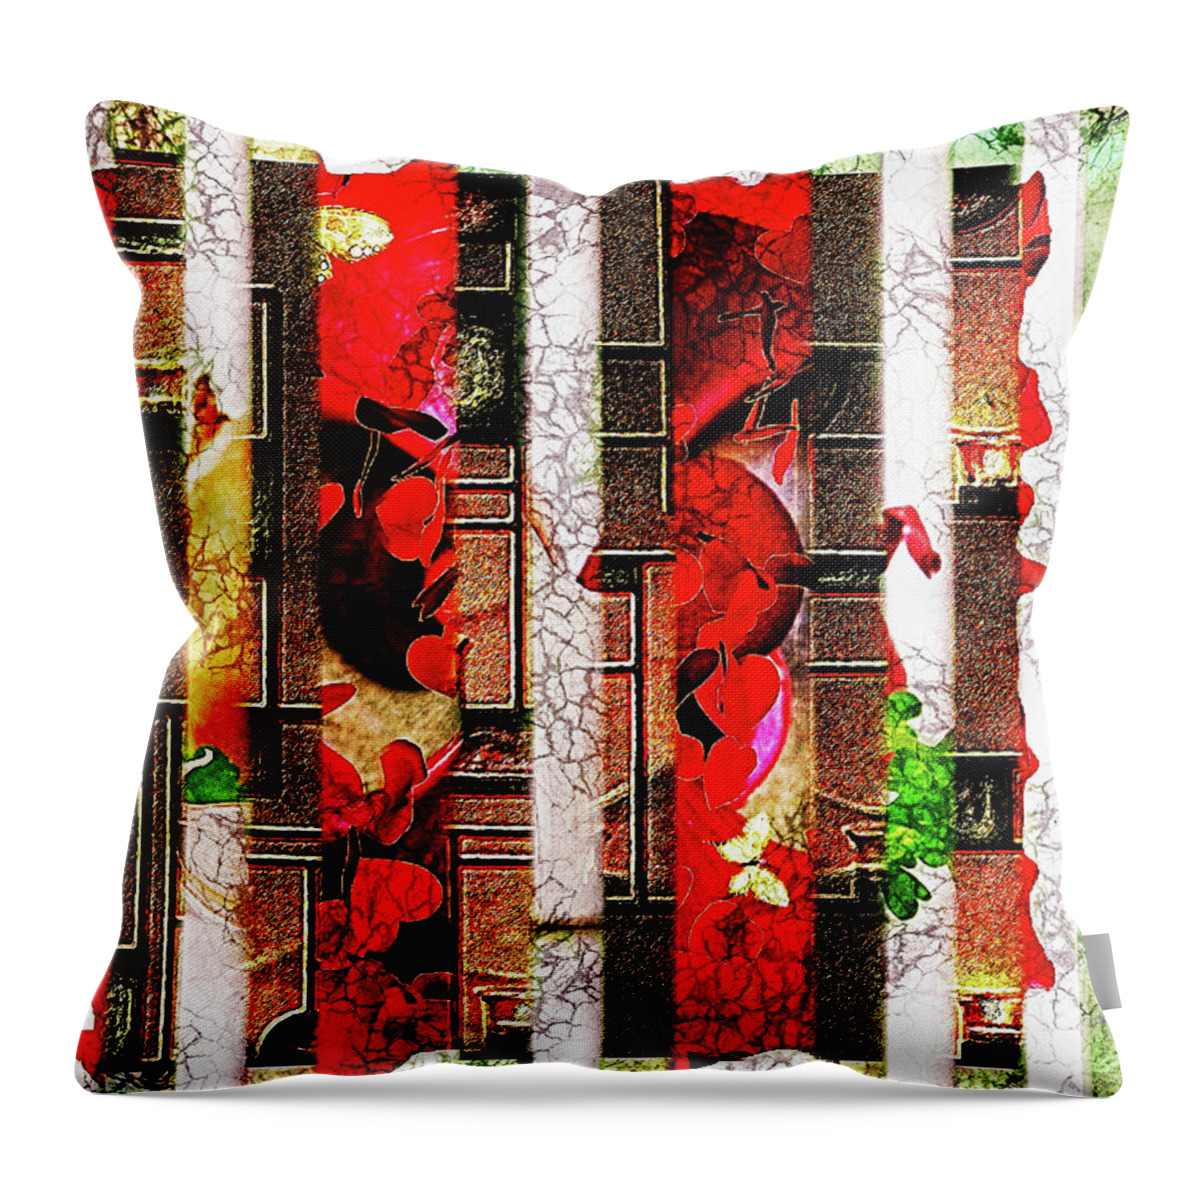 Abstract Window Wall Art Throw Pillow featuring the mixed media Colored Windows by Paula Ayers